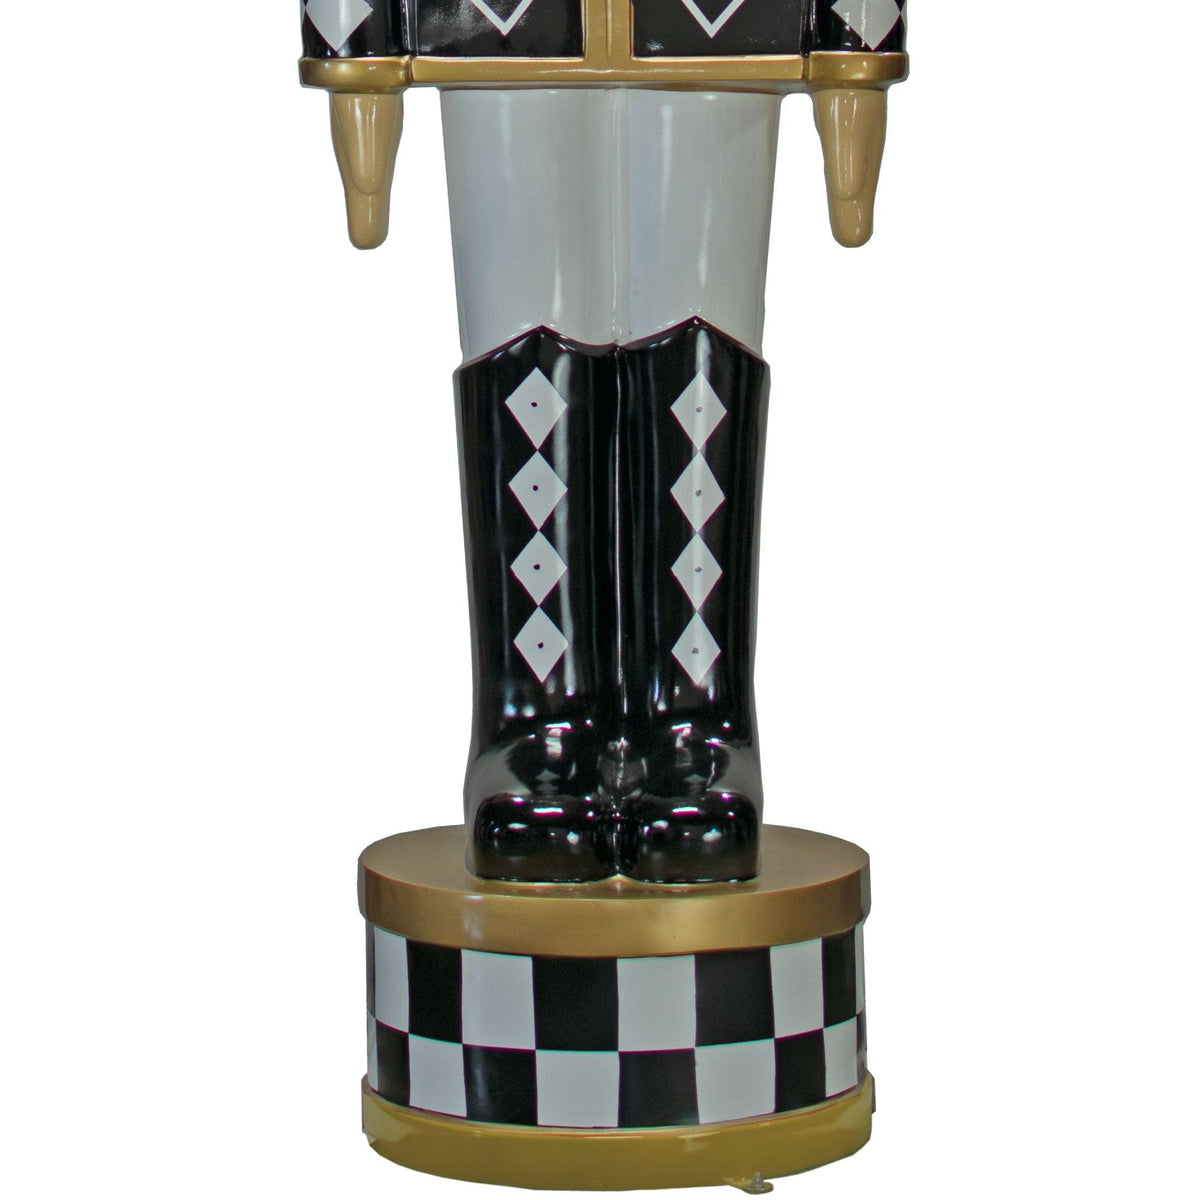 Black and White 12FT Fiberglass Nutcrackers for sale for purchase and rental from leedisplay.com.  Shop now